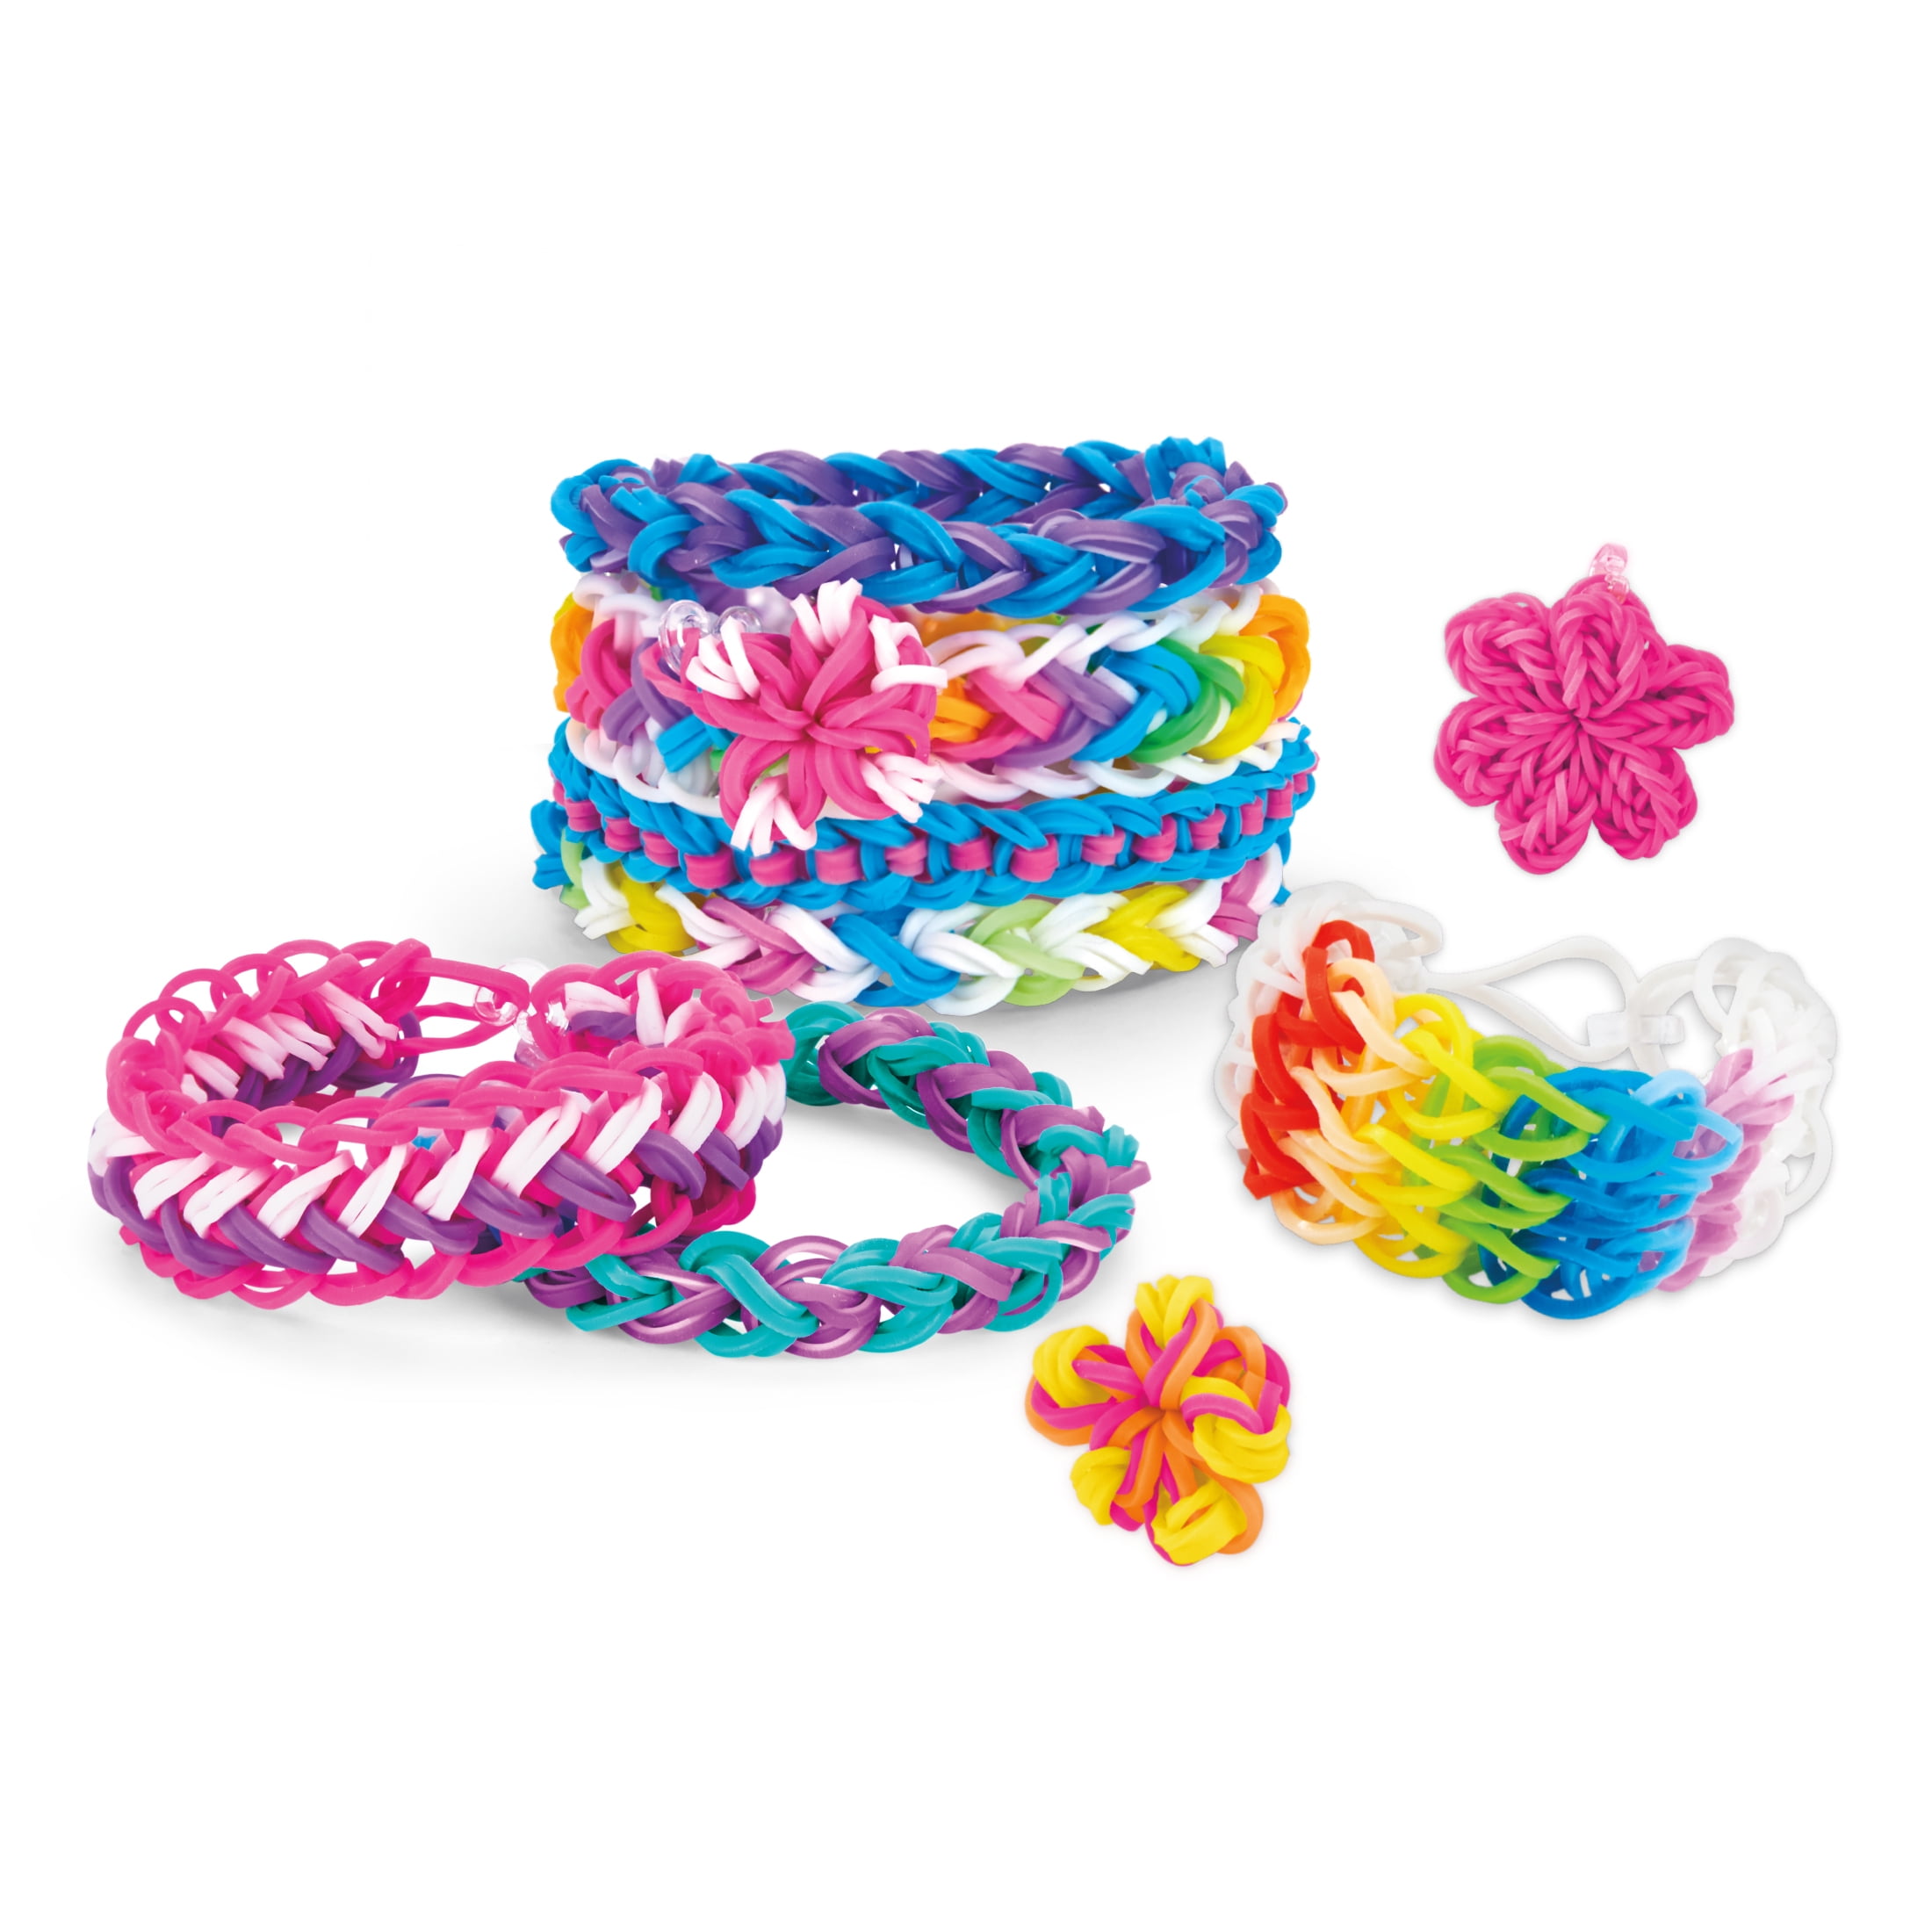 Cra-Z-Art Be Inspired Cra-Z-Loom 3-in-1 Rubber Band Bracelet Extravaganza,  Multicolor Kit Ages 8 and up 